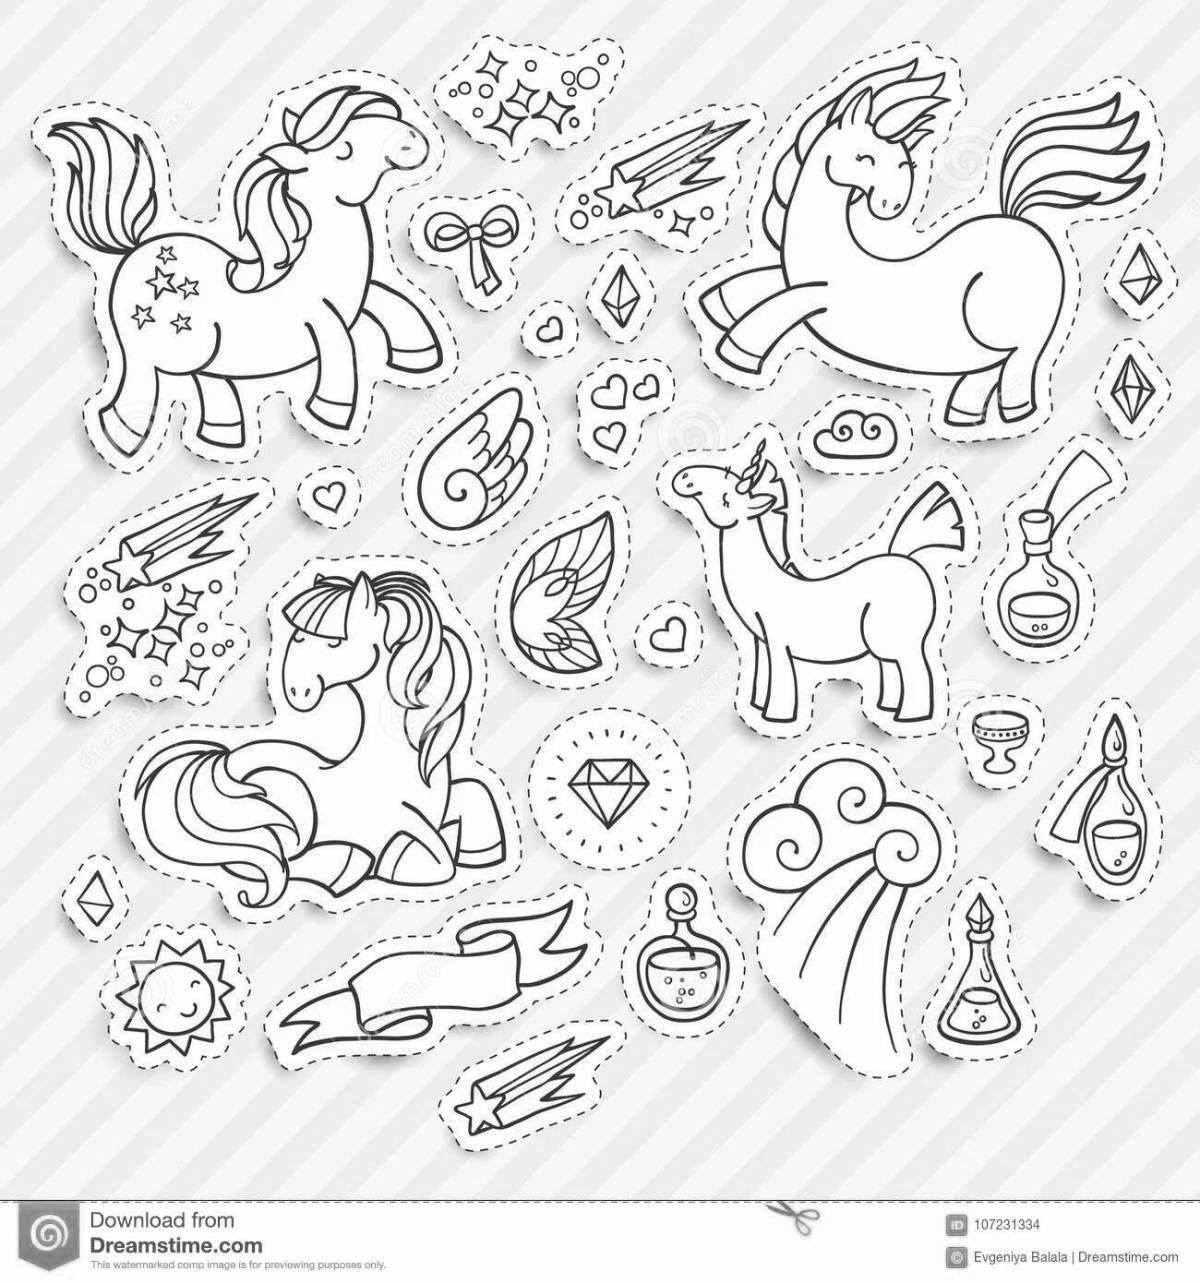 Adorable coloring book with lots of unicorns